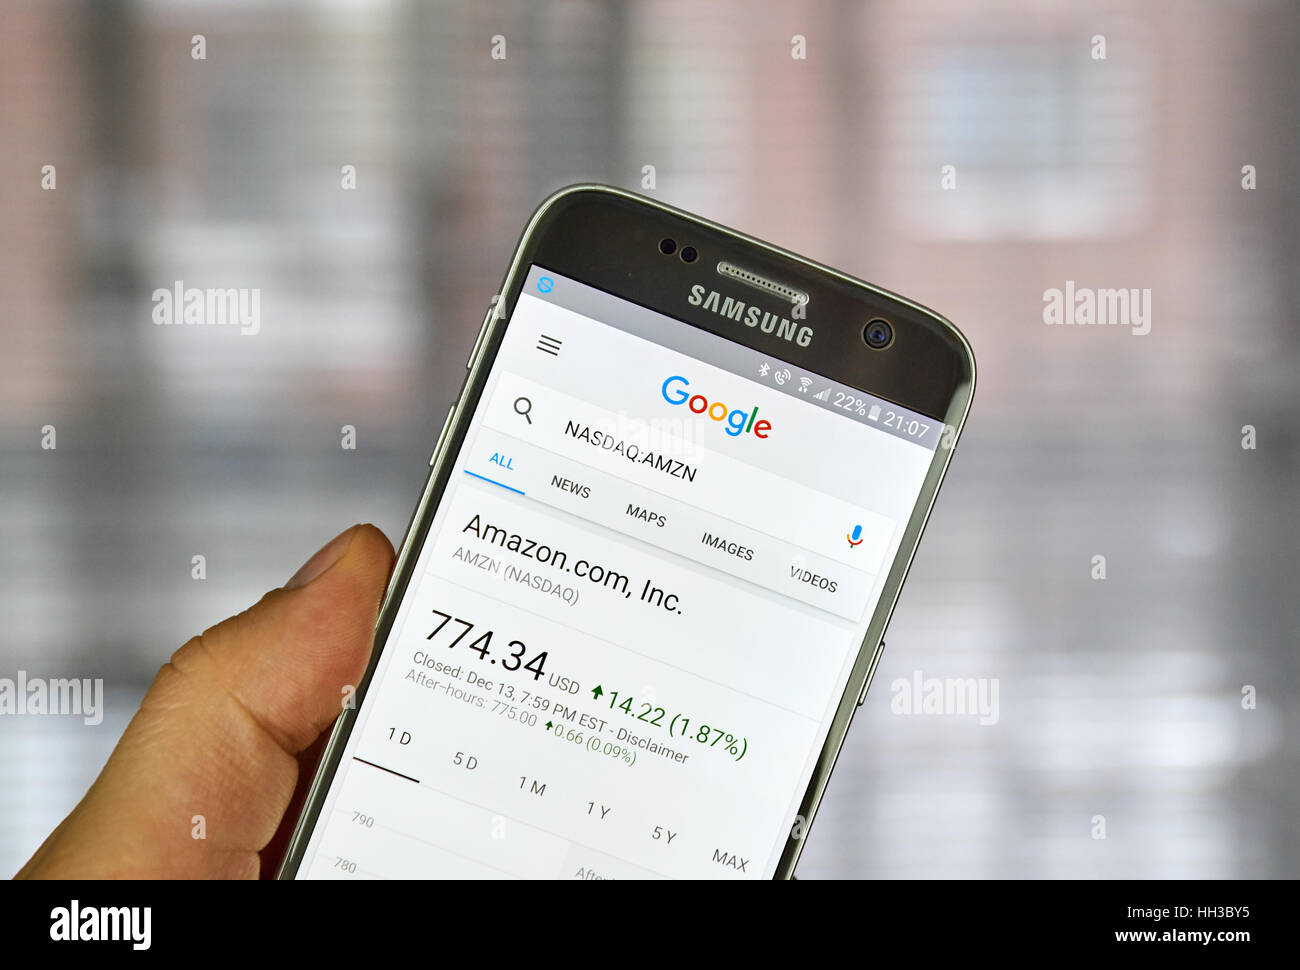 MONTREAL, CANADA - DECEMBER 23, 2016 : Google Finance page with stock chart and Amazon ticker on Samsung S7 screen. Stock Photo